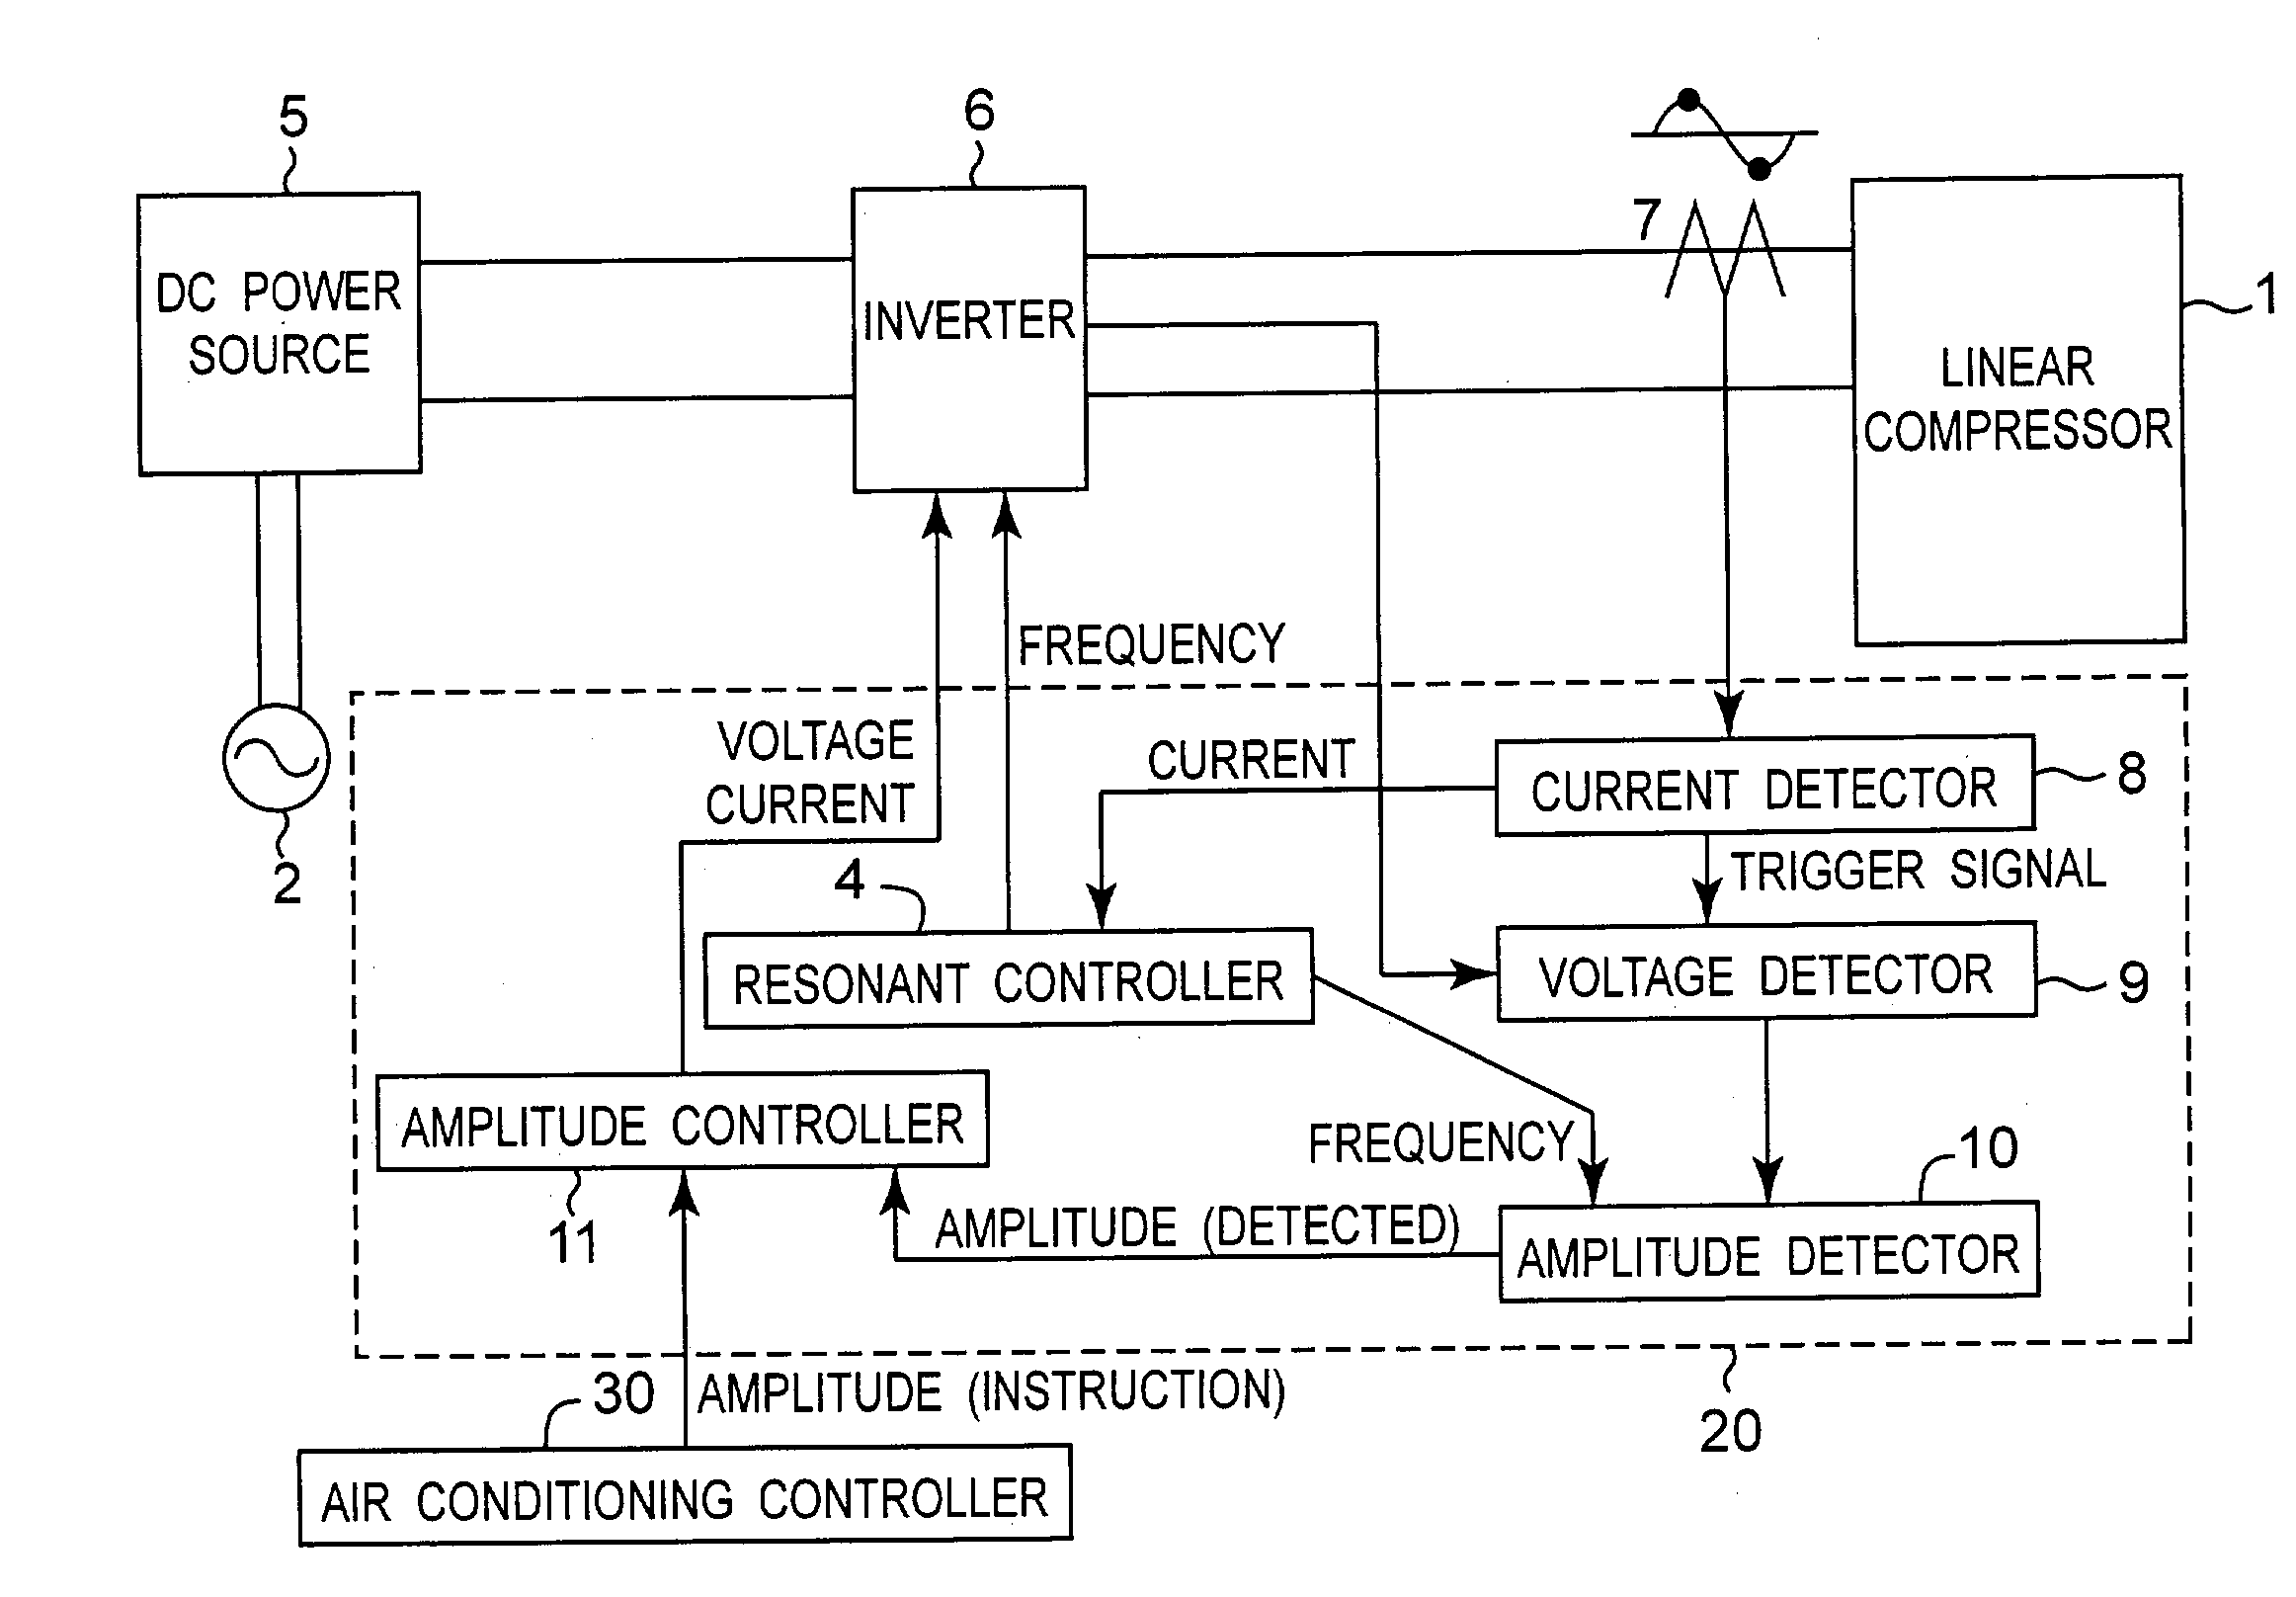 Driving apparatus of a linear motor